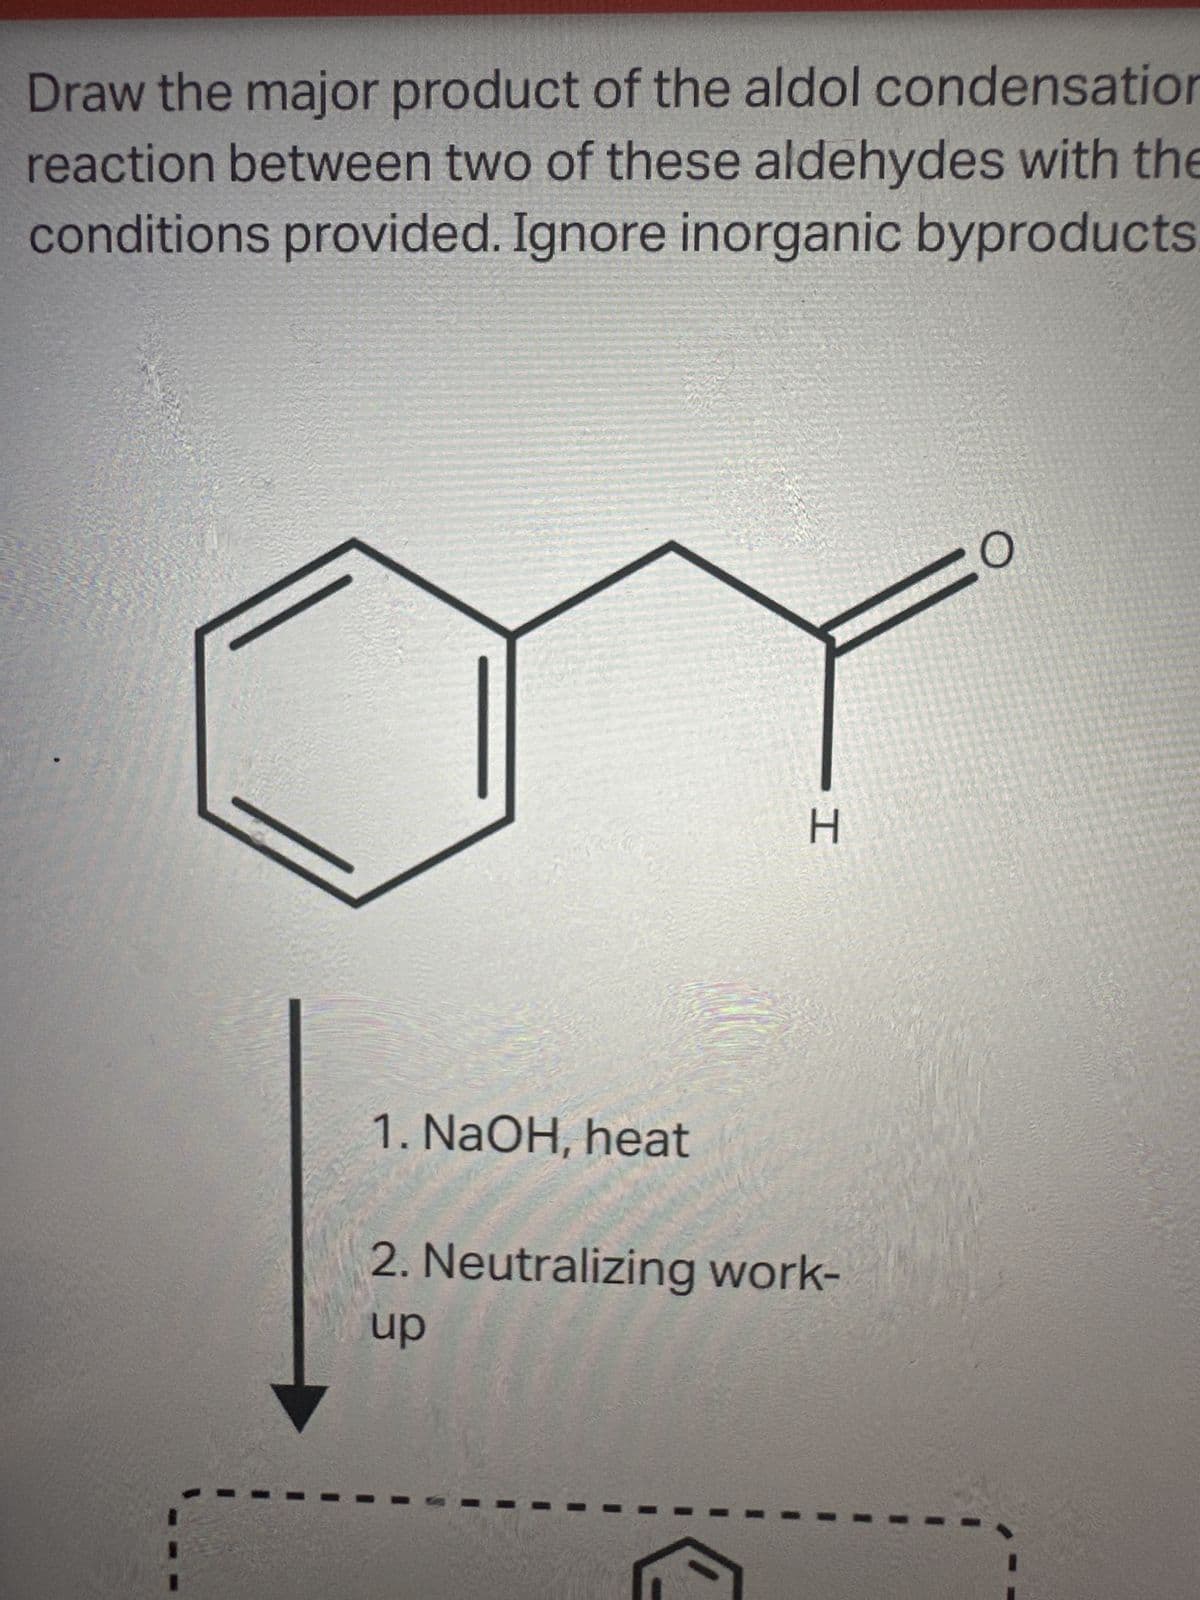 Draw the major product of the aldol condensation
reaction between two of these aldehydes with the
conditions provided. Ignore inorganic byproducts.
1. NaOH, heat
-I
H
2. Neutralizing work-
up